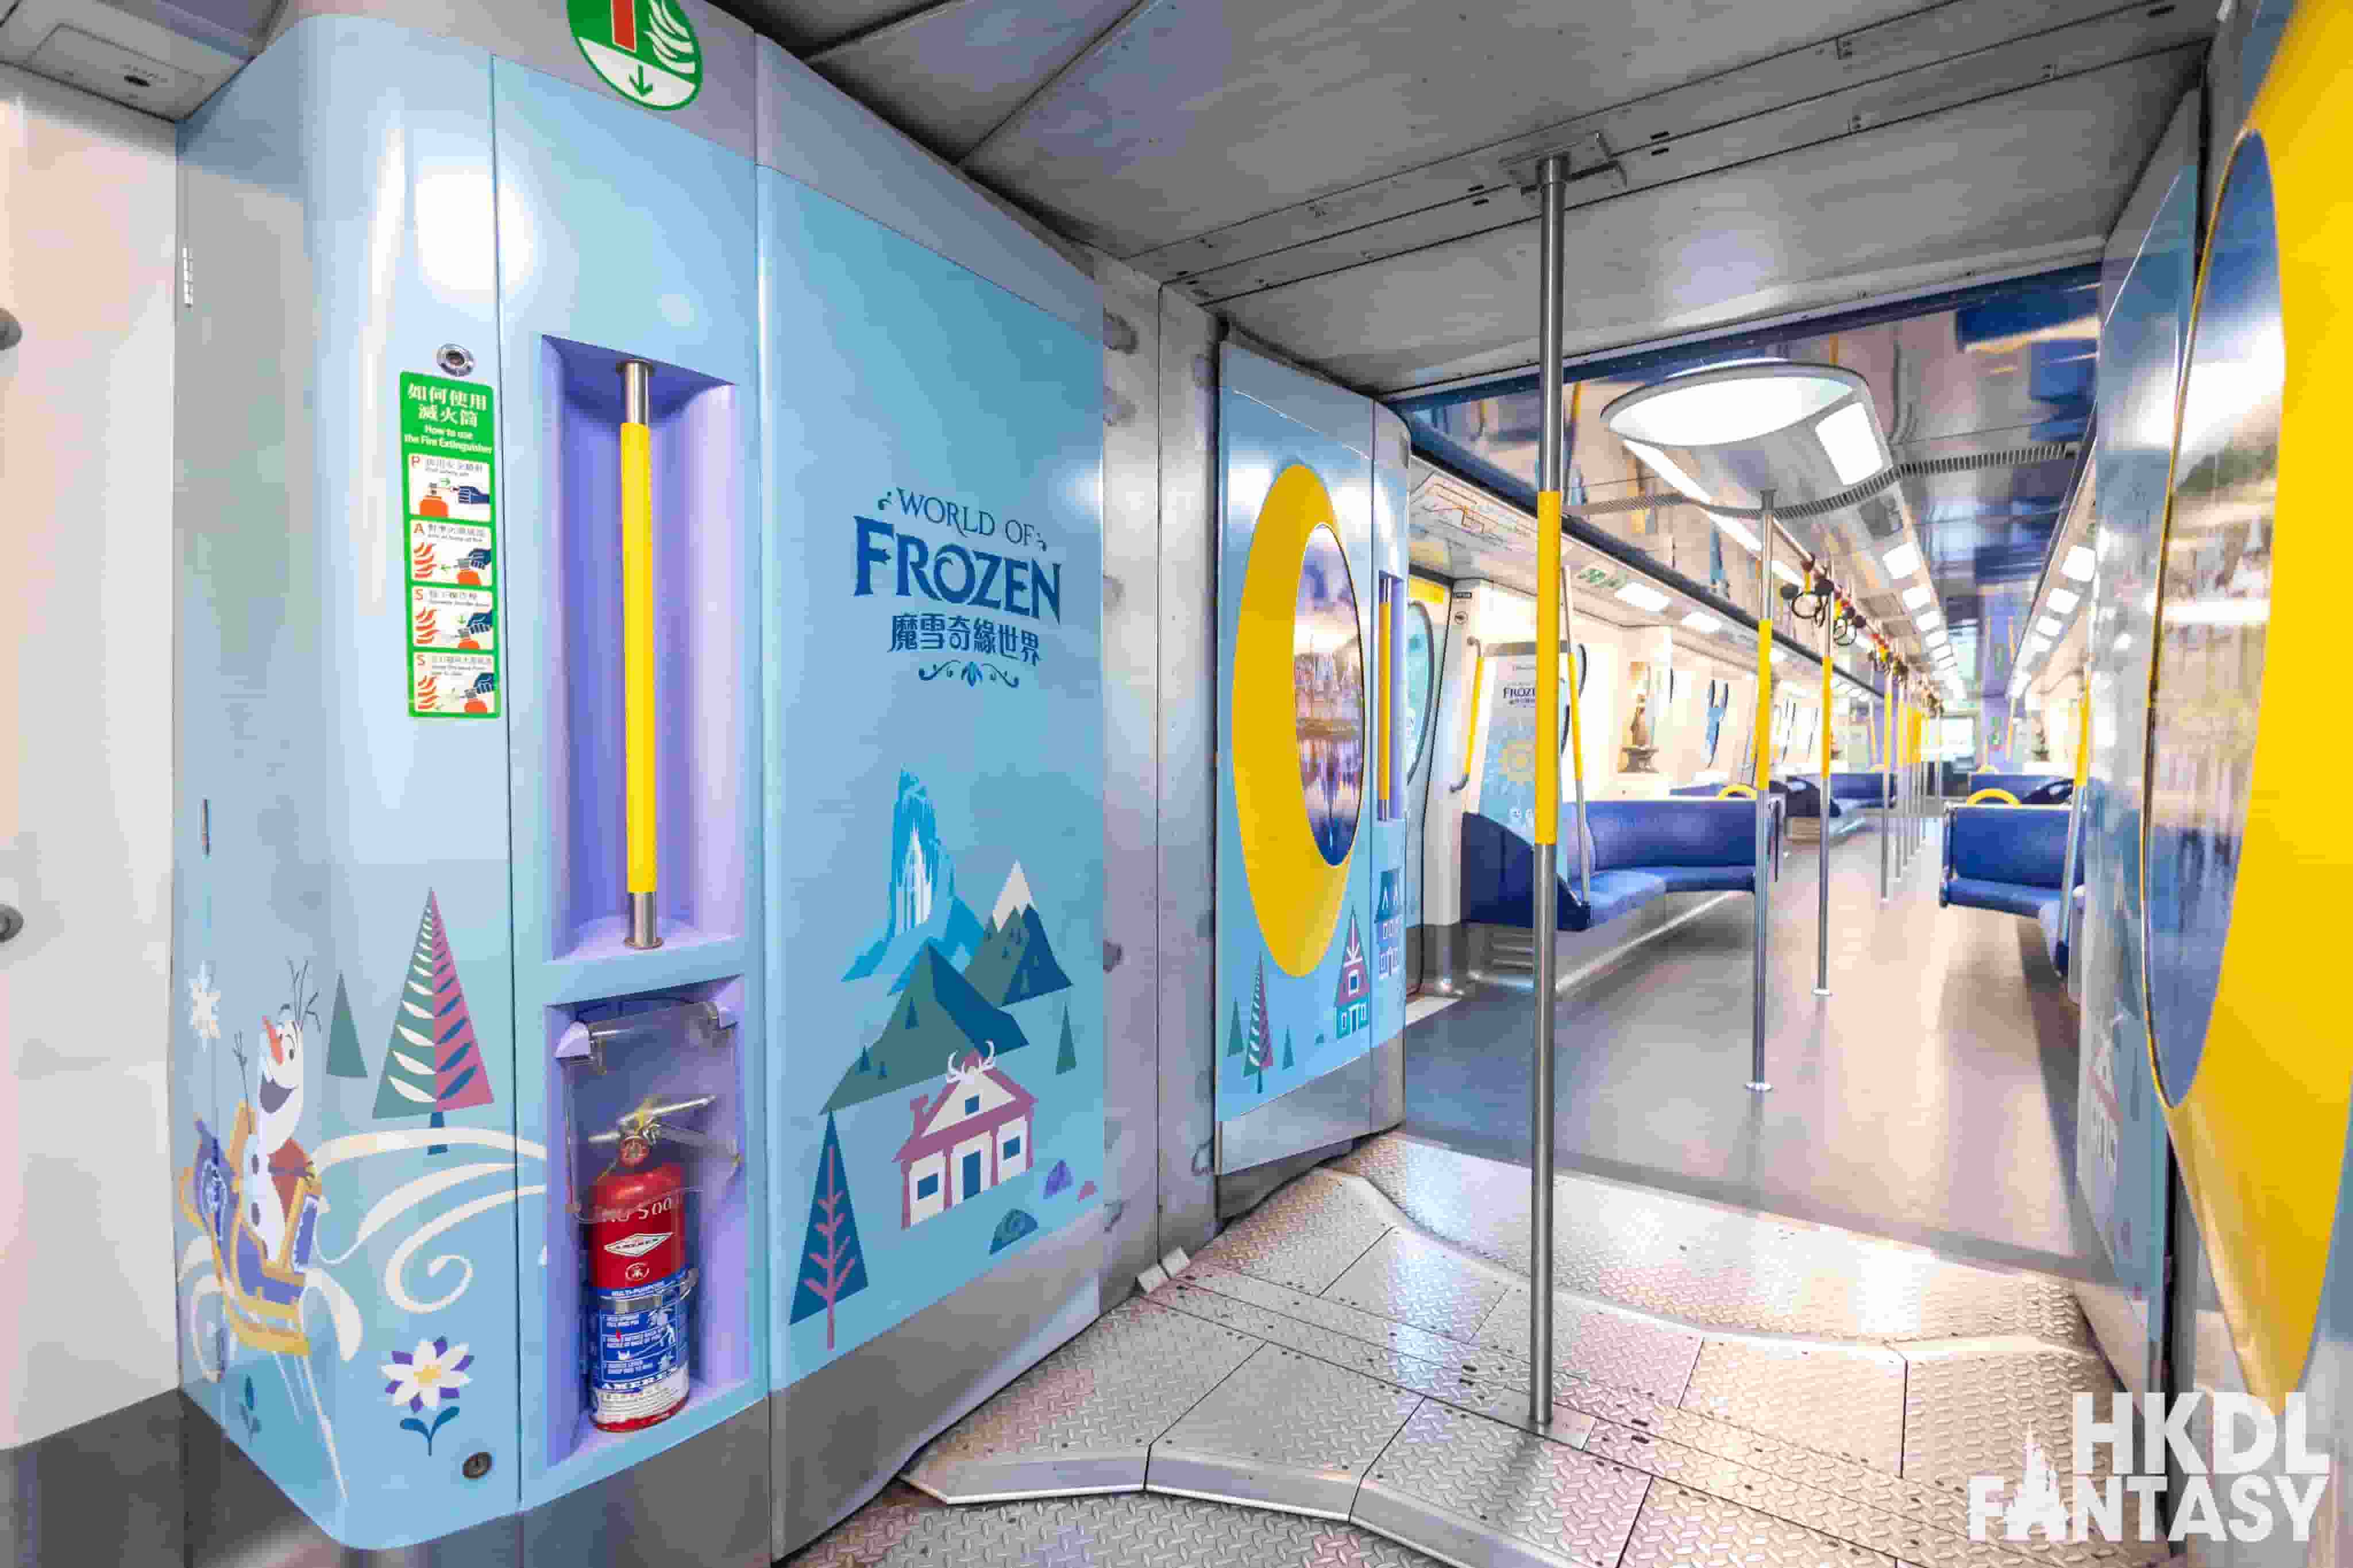 Photo of the Disneyland MTR line train interior with the World of Frozen promotion